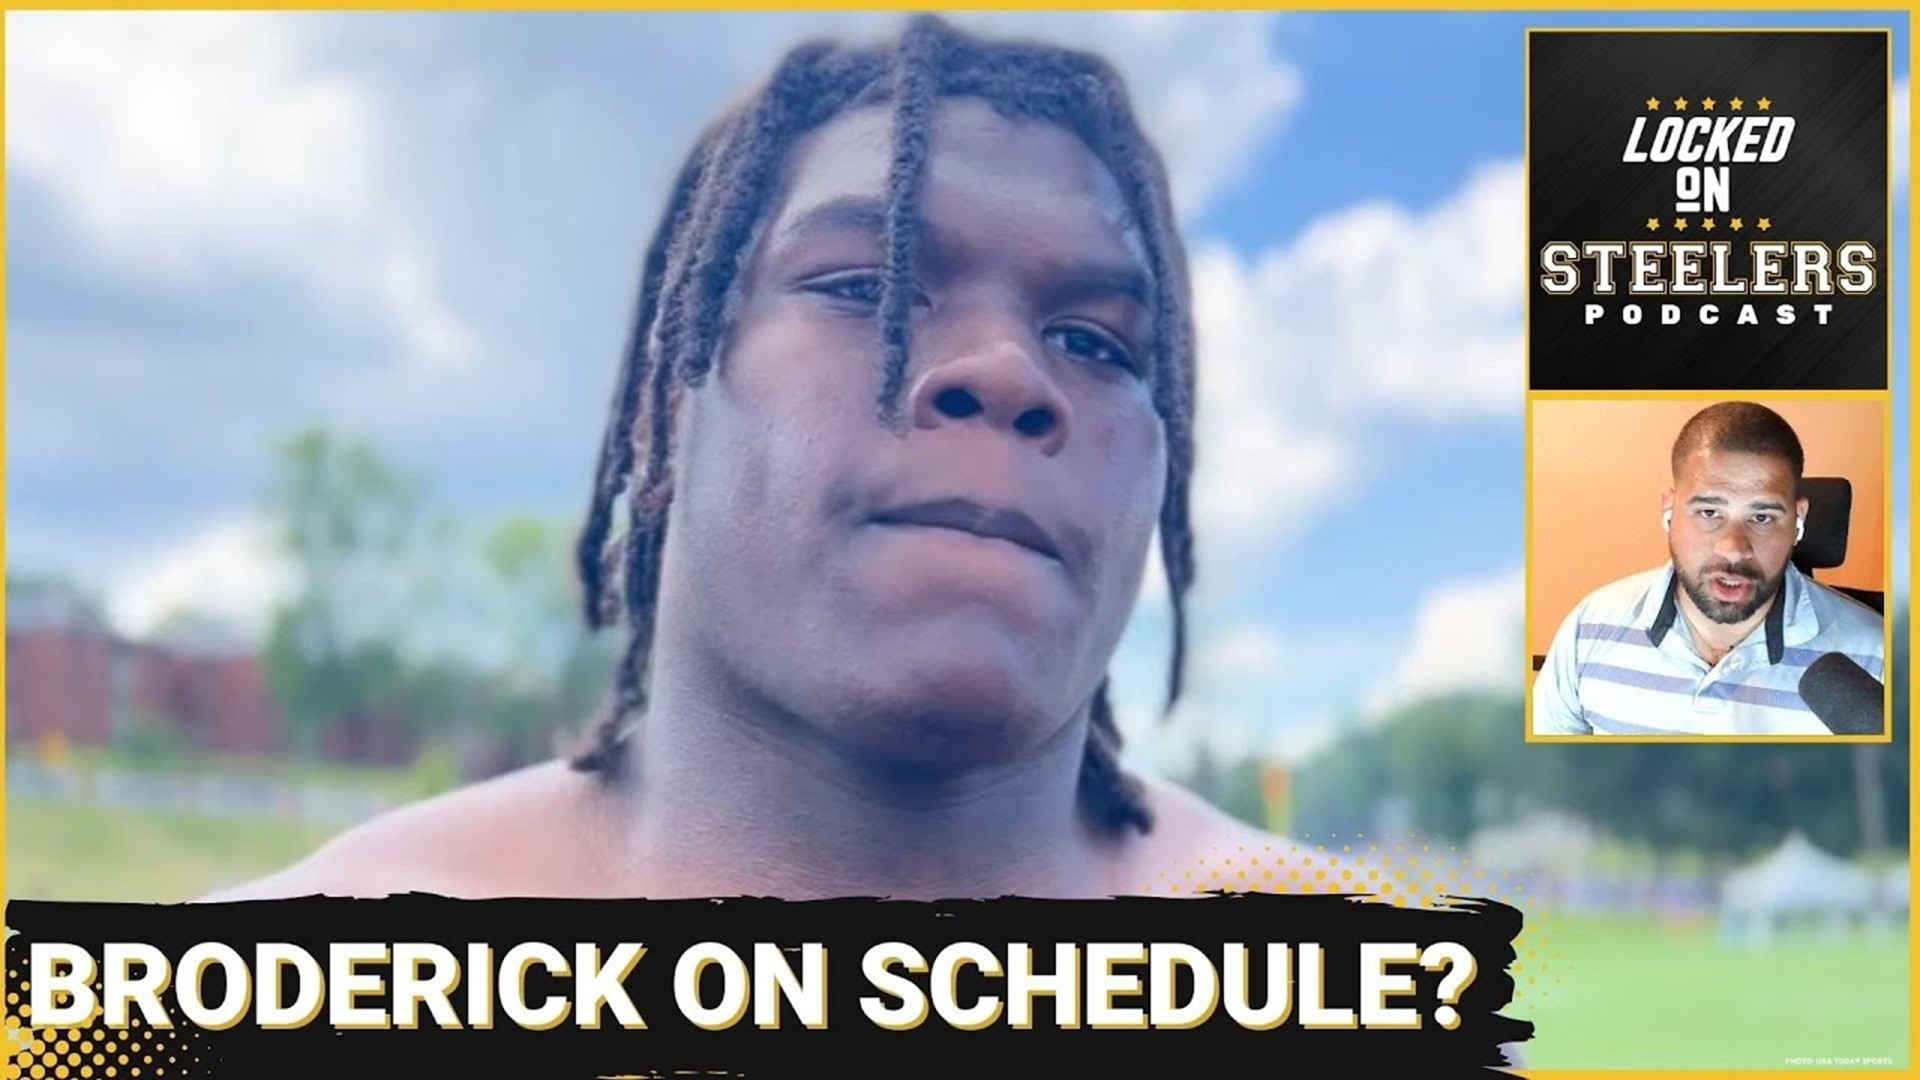 The Pittsburgh Steelers appear to have rookie left tackle Broderick Jones on schedule after their first preseason game.